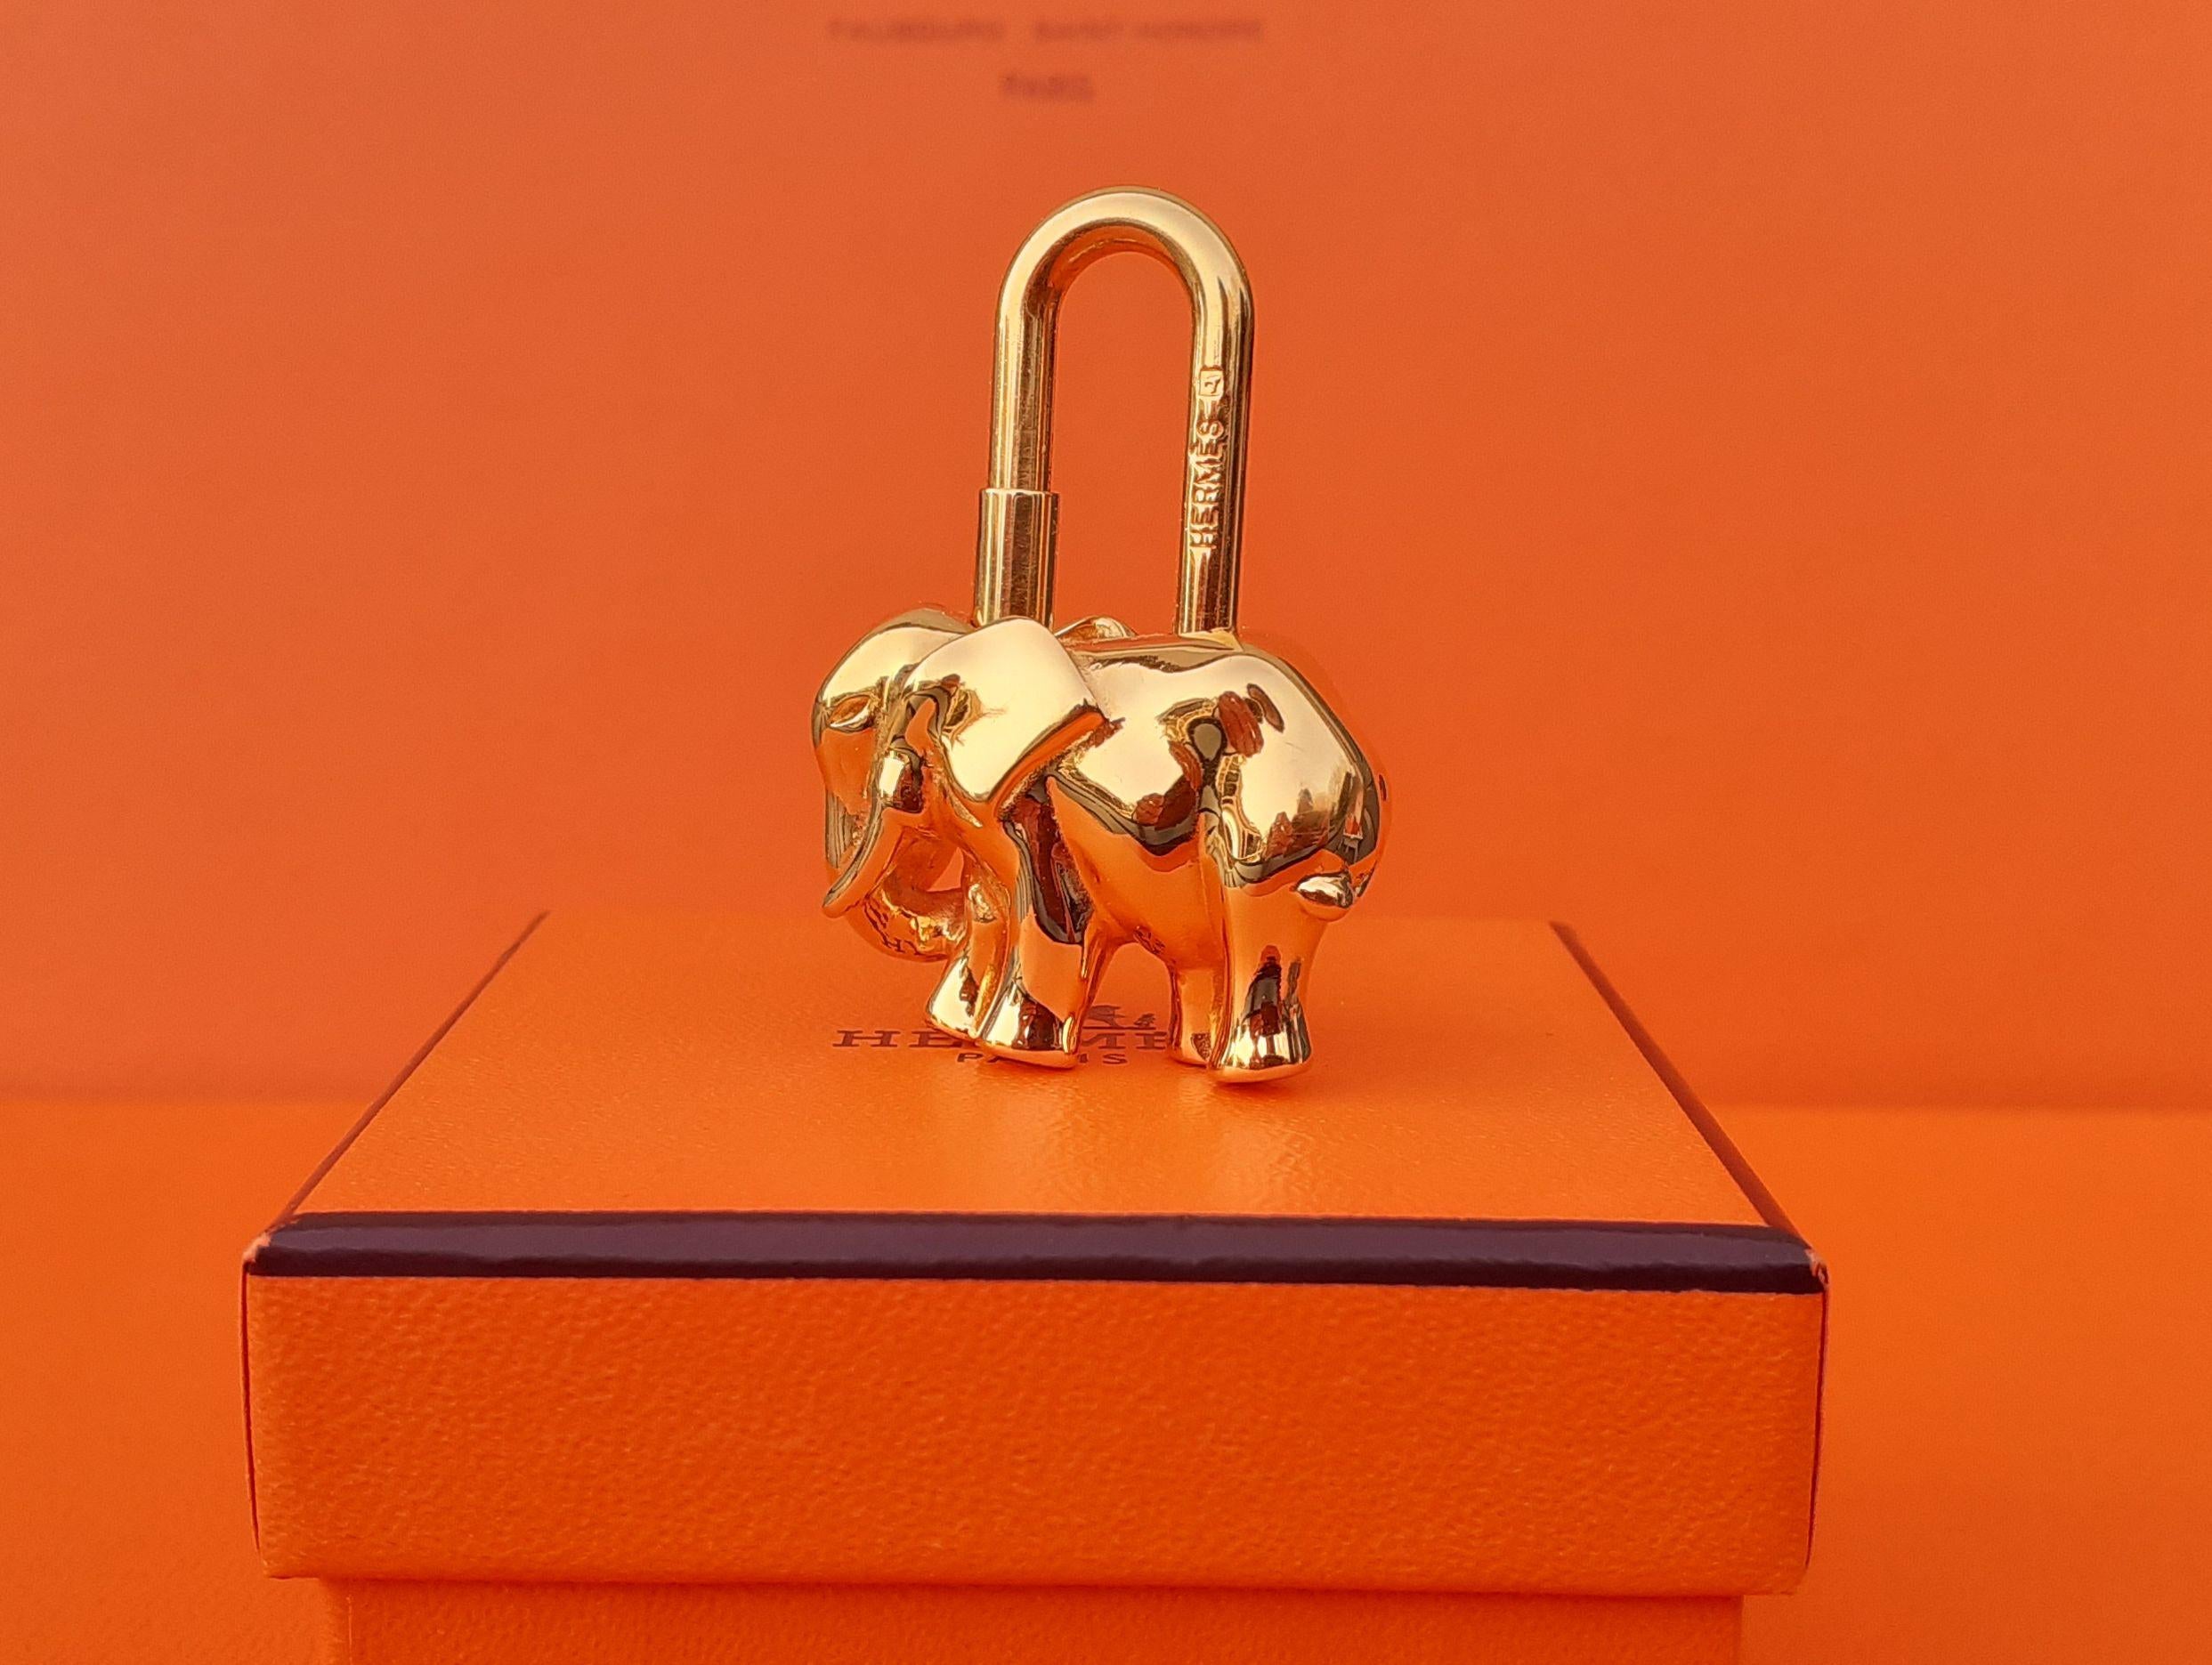 Adorabel Authentic Hermès Padlock

Elephant shaped 

Lilited Edition, Collector !

Can be used as lock, bag lock, key holder, charm, scarf ring...

Opens by unscrewing the front of the buckle

Made of Yellow Gold Plated 

Colorway: Yellow